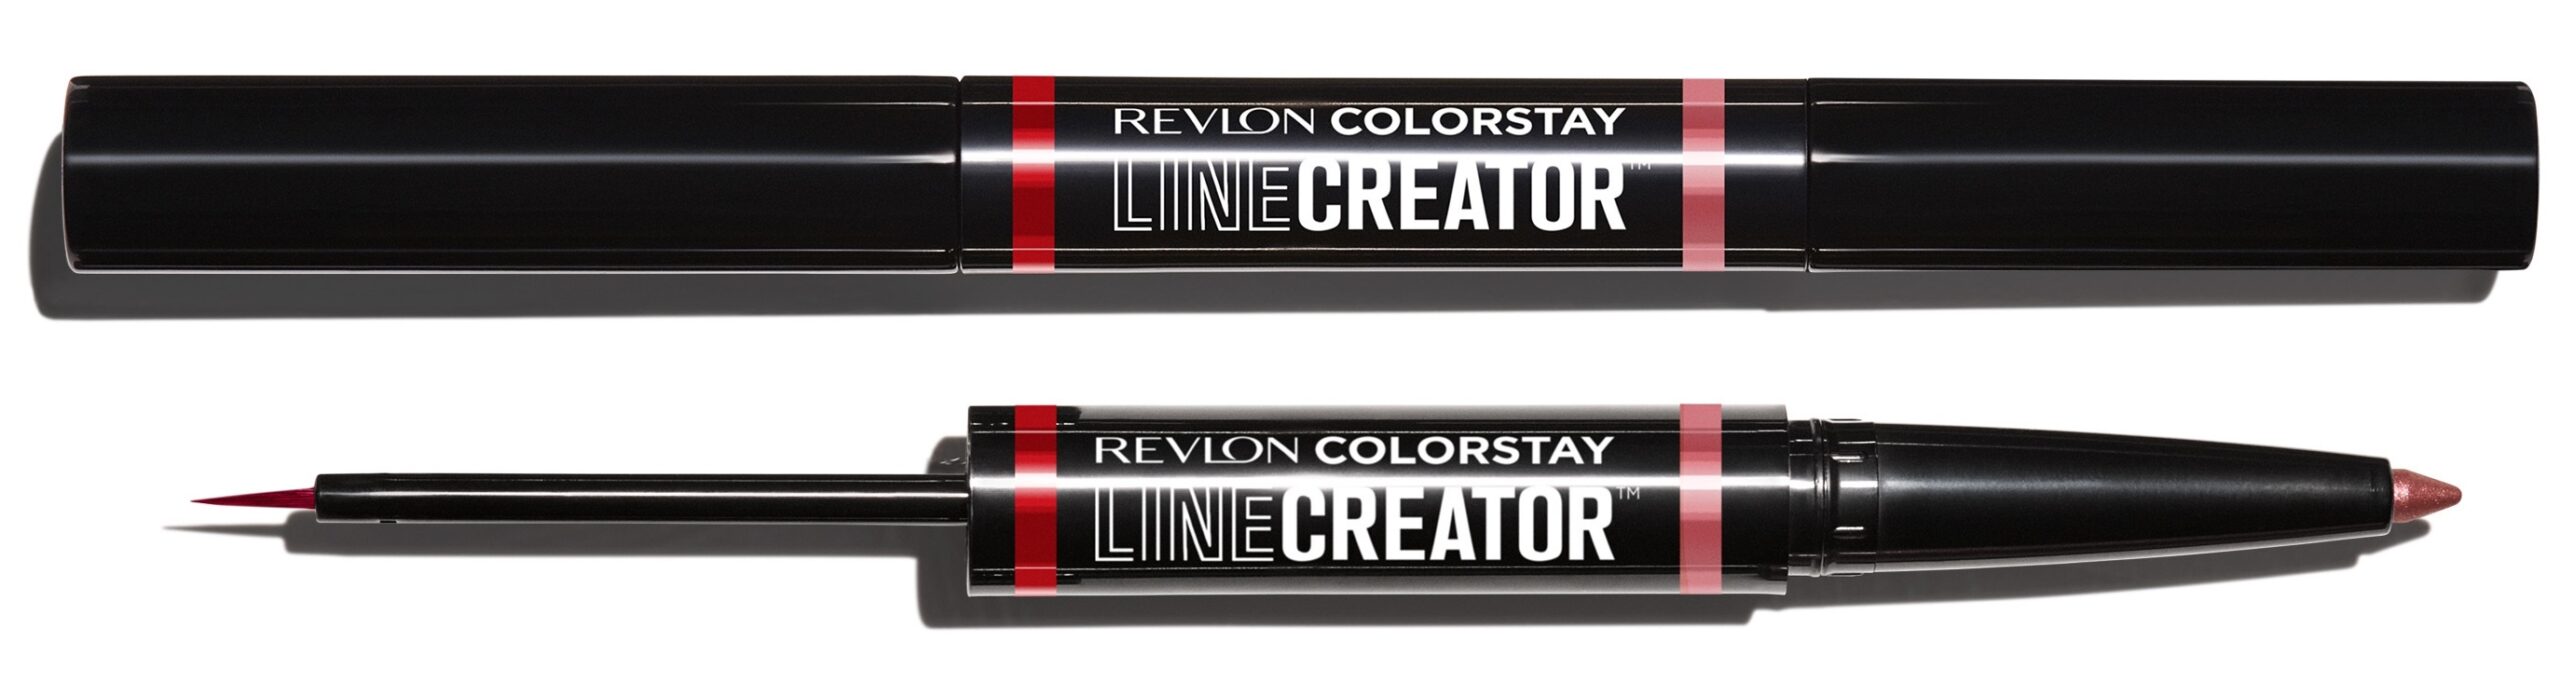 ColorStay Line Creator Double Ended Liner ($12.99)